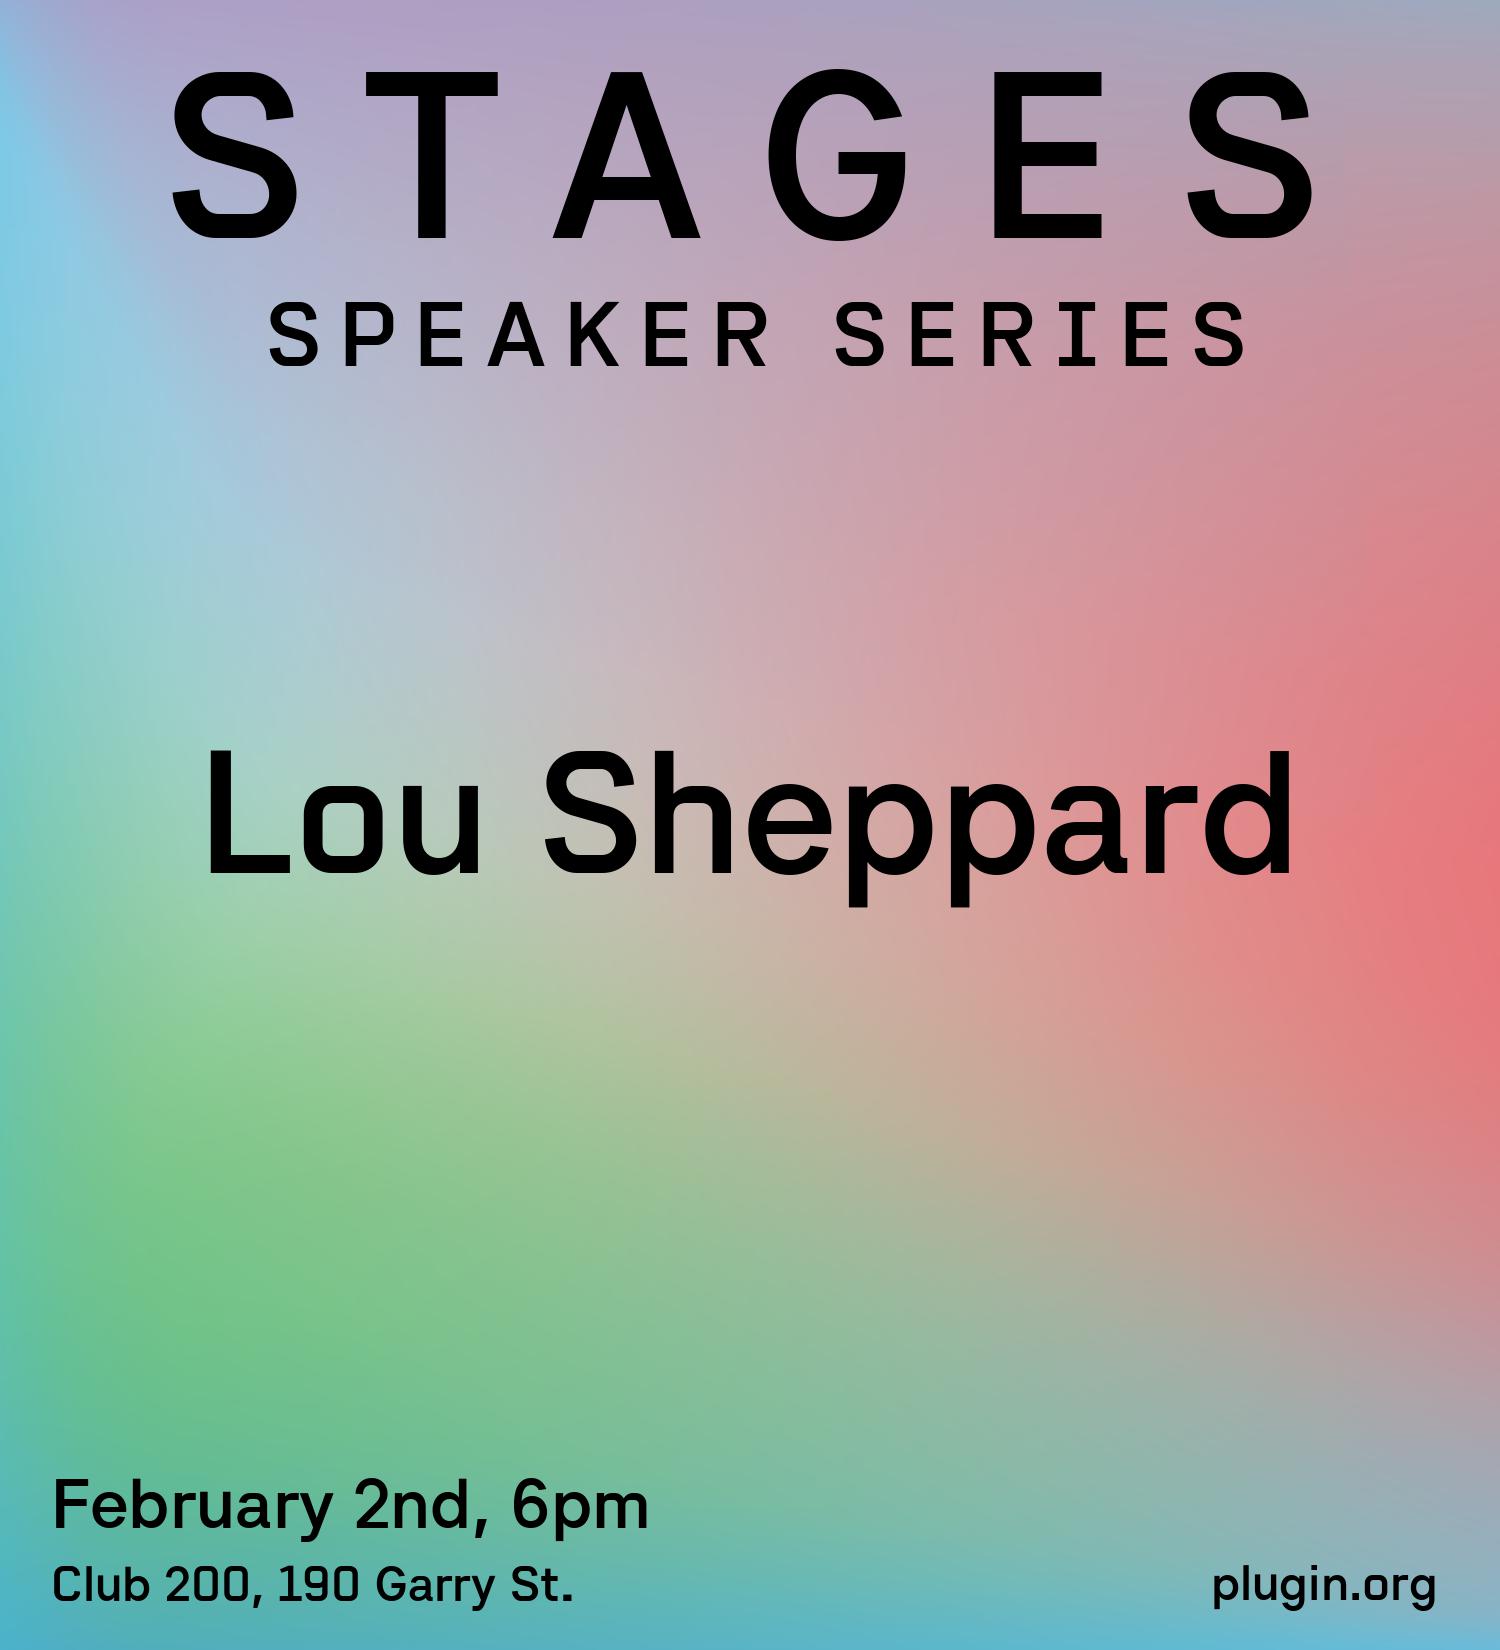 graphic design that reads: stages speaker series with Lou Sheppards name. The date of the event is February 2nd at 6pm and is held at Club 200, 190 Garry Street.